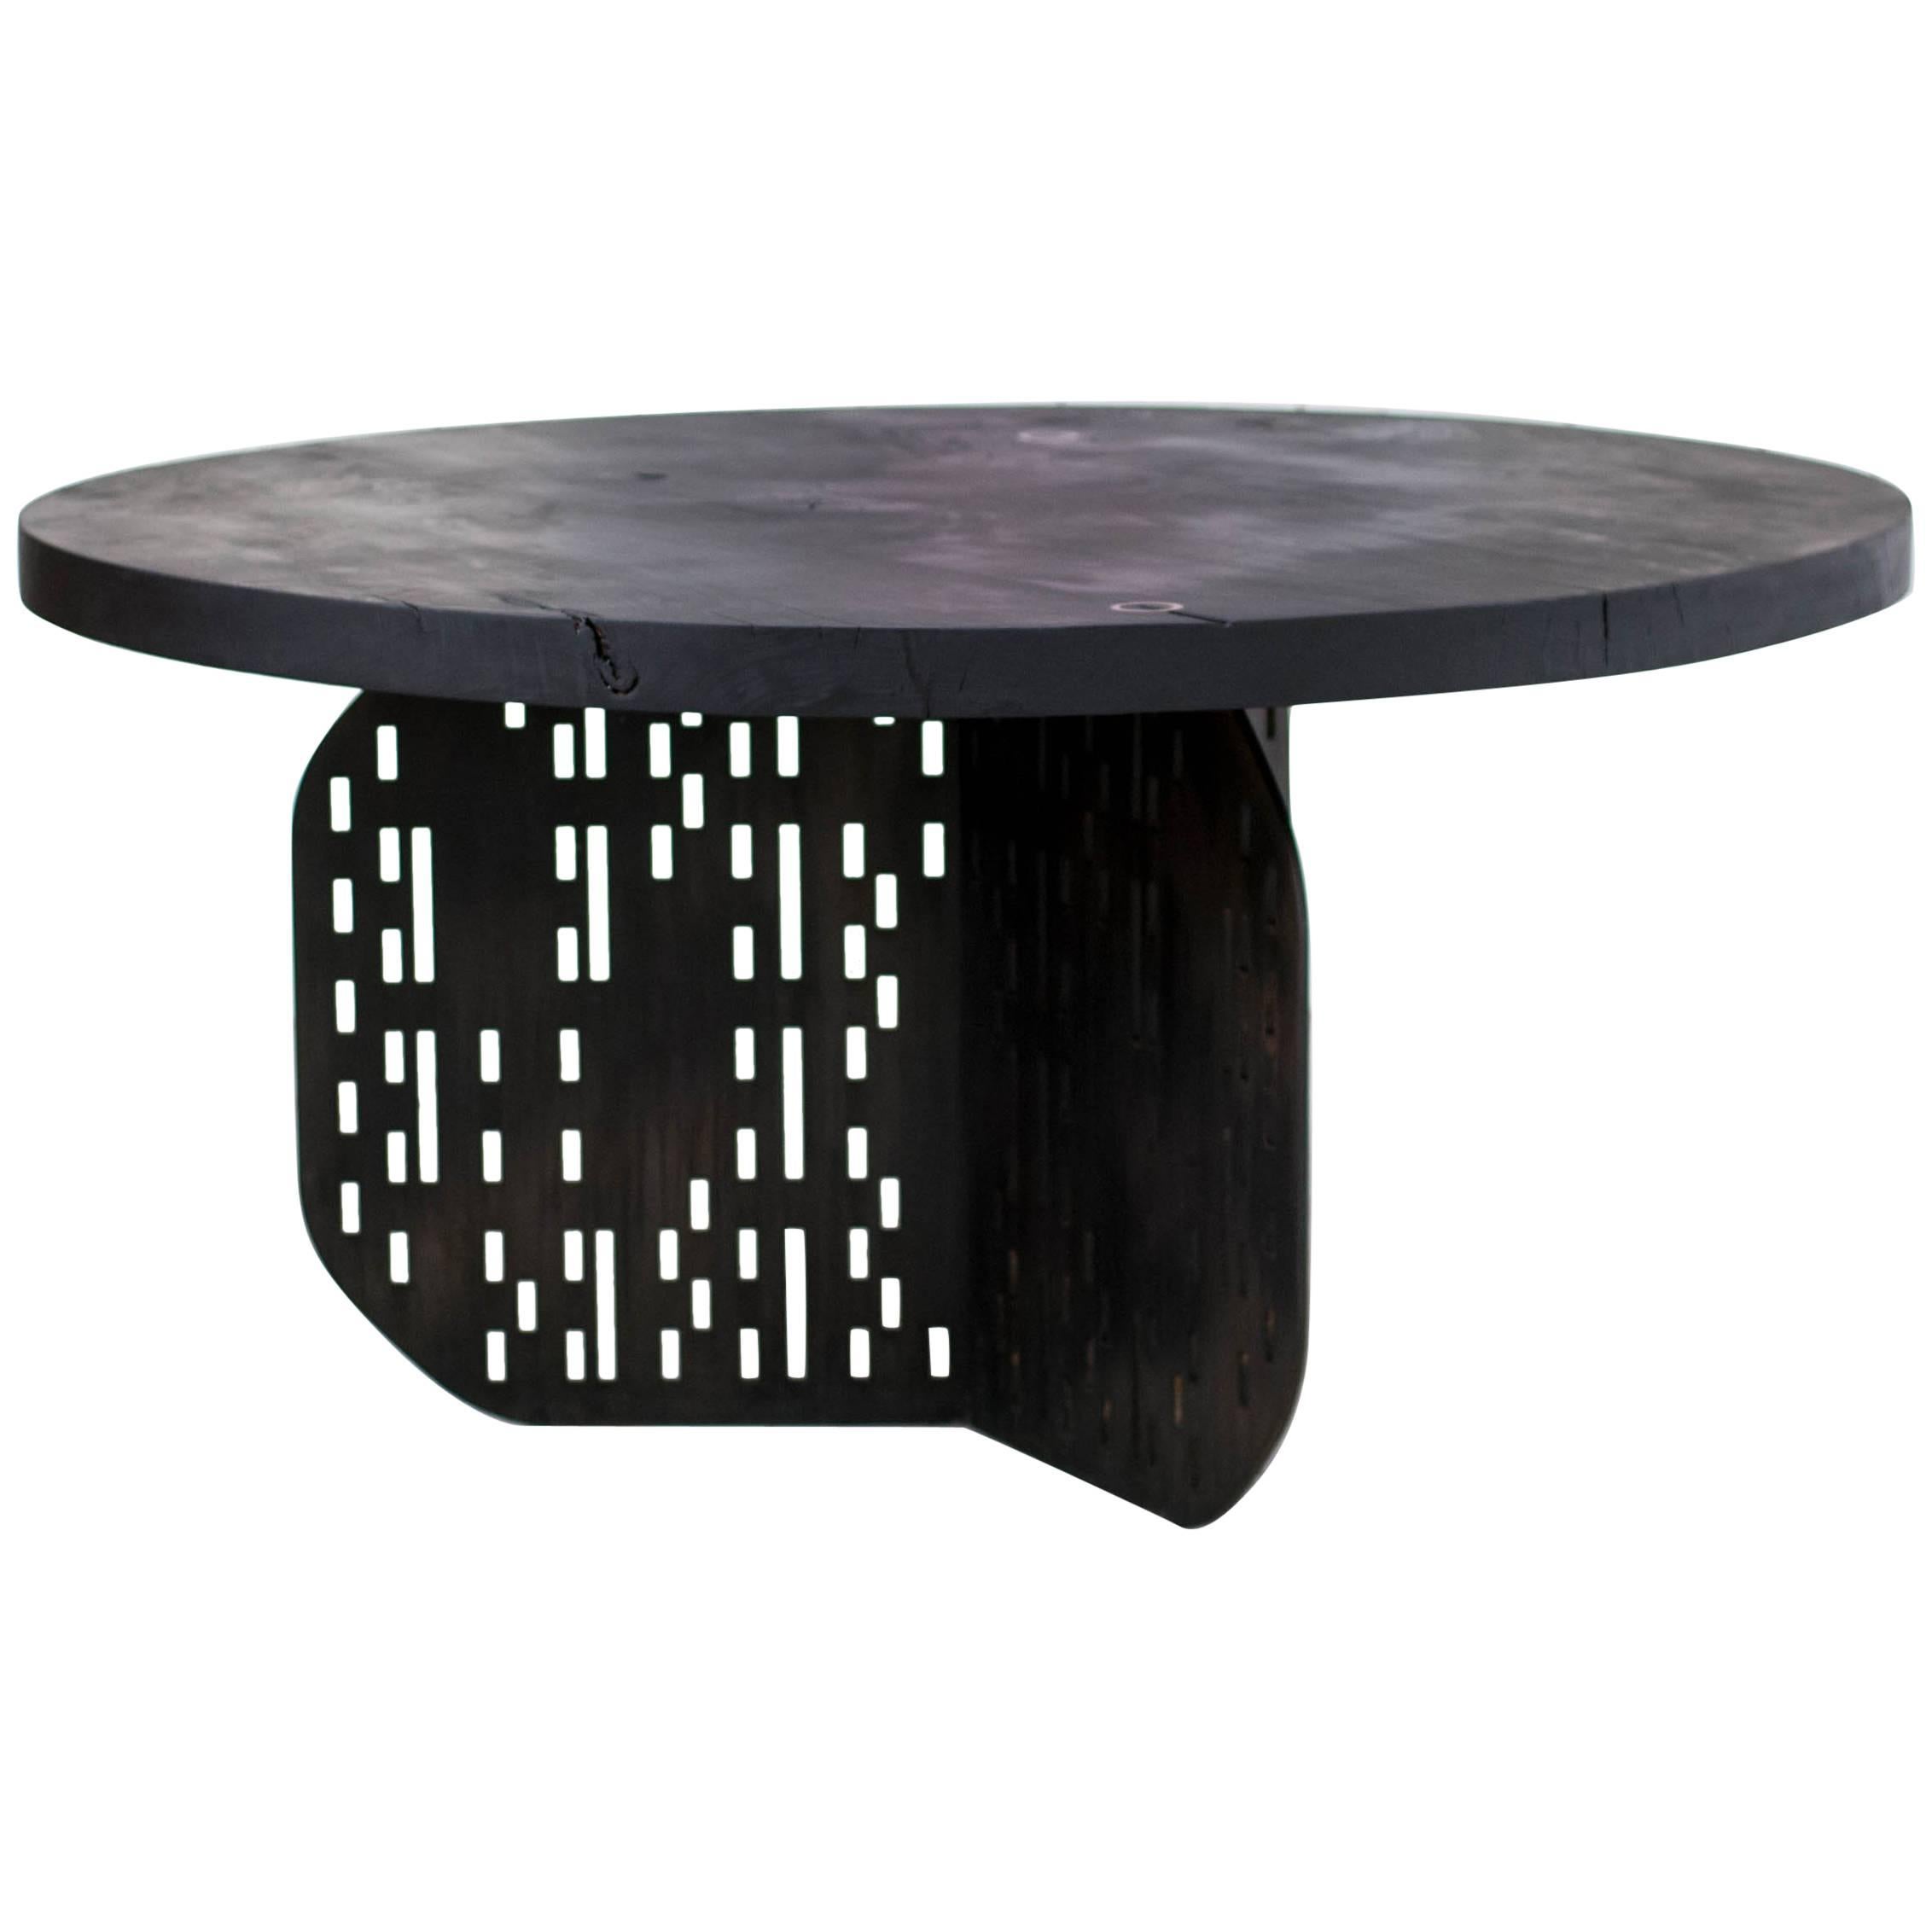 Darcy Table in Blackened Steel, Bronze and Charred Maple